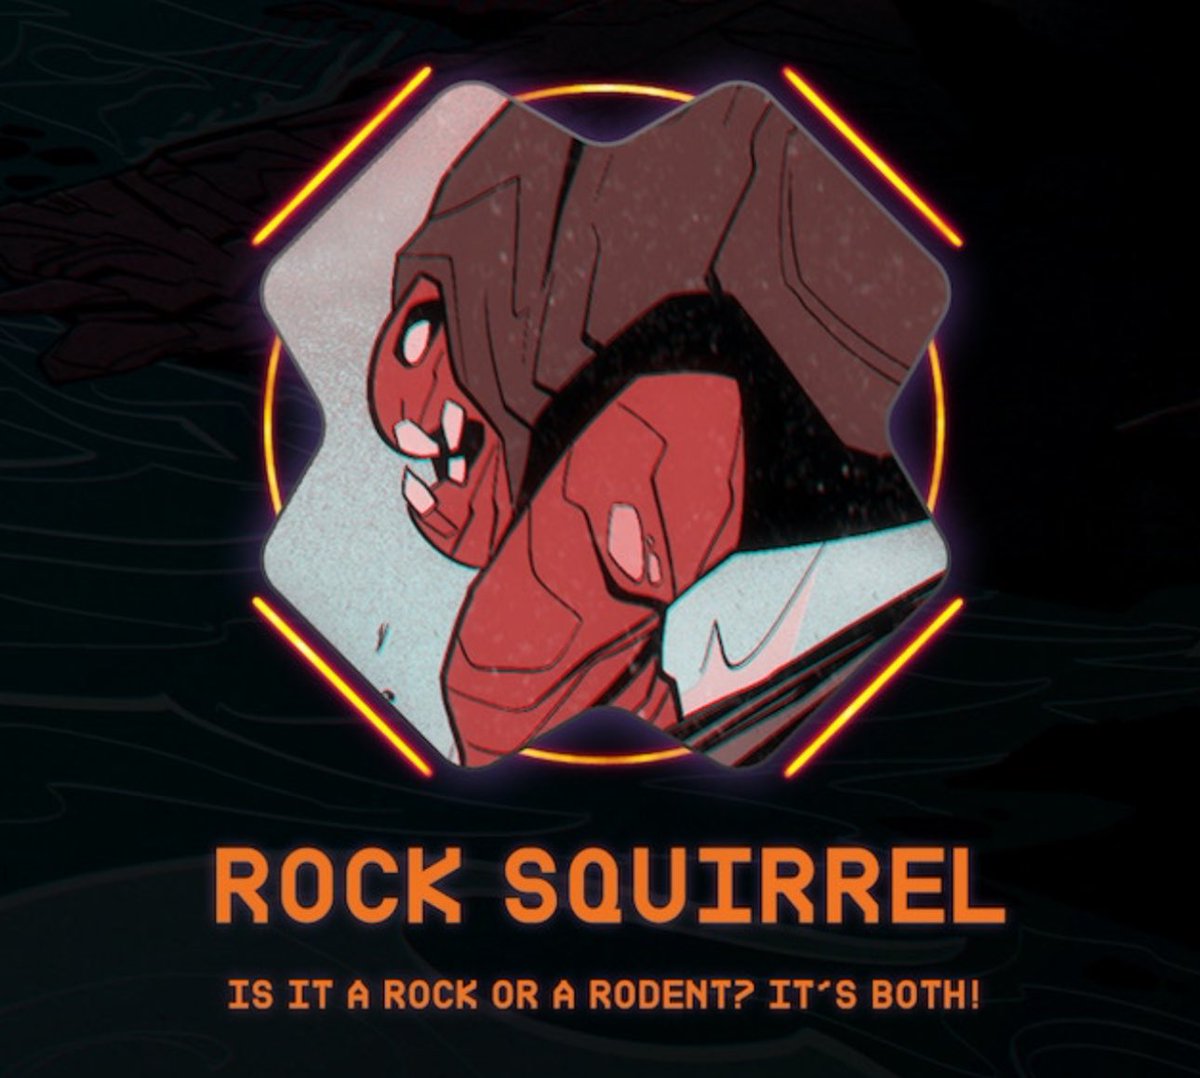 You had us at “rock squirrel.” Pre-order @carlosgiffoni & @juandoe’s gorgeous graphic novel Two Suns, funded on Kickstarter! kickstarter.com/projects/rocke… #Kickstarter #KickstarterReads #KickstarterCampaign